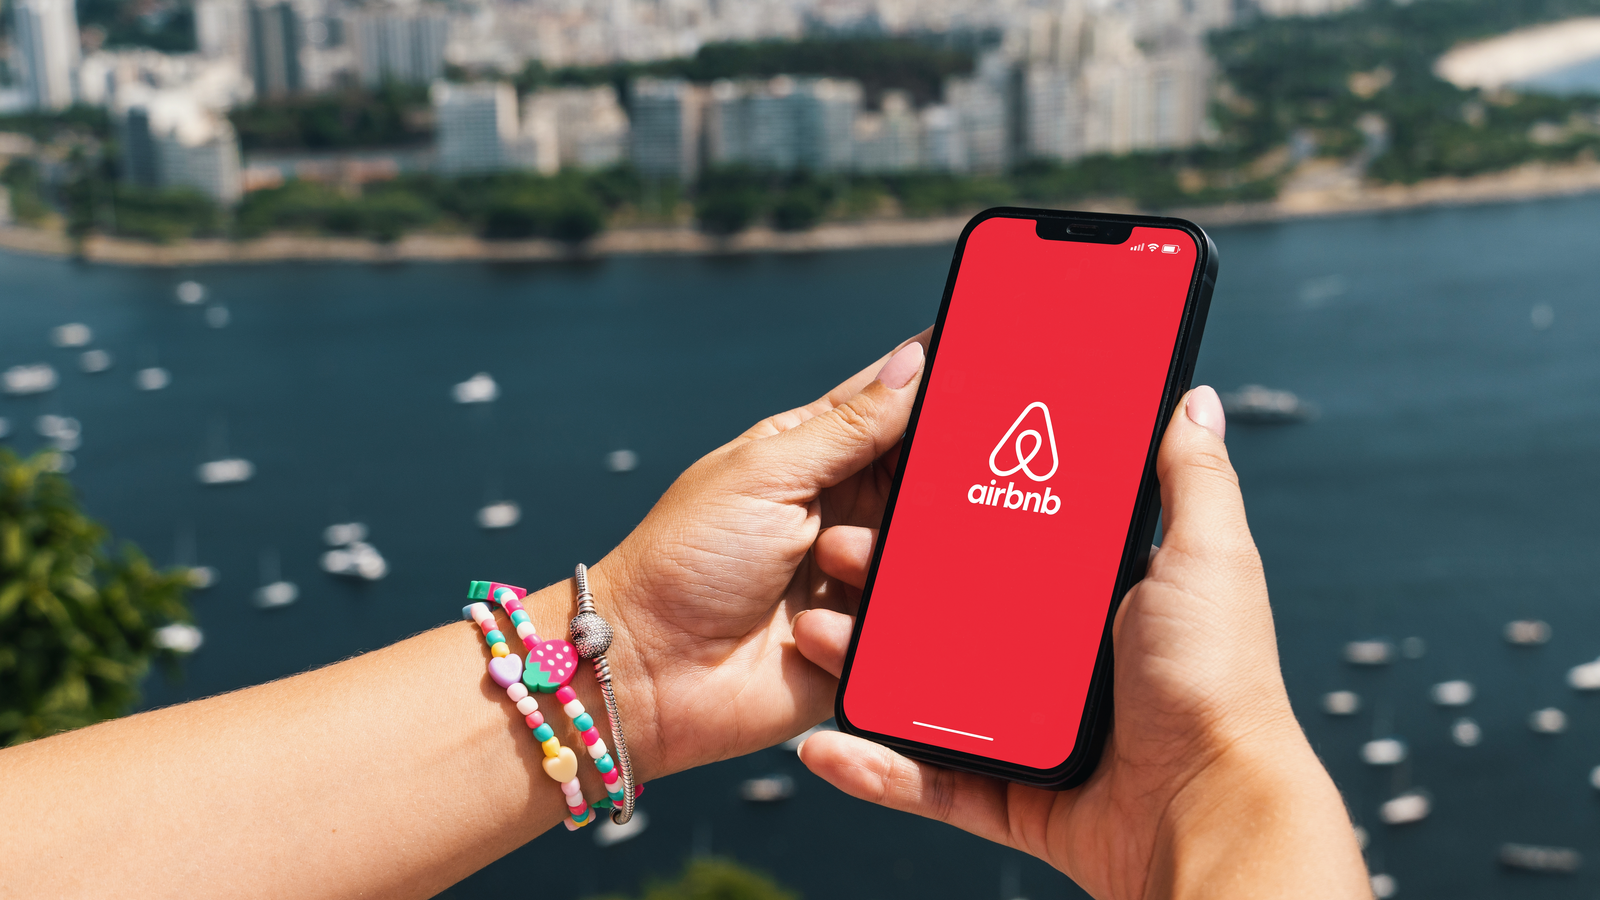 Girl holding smartphone with Airbnb app on screen. City and bay with some boats in the background. Rio de Janeiro, Brazil. ABNB Stock.